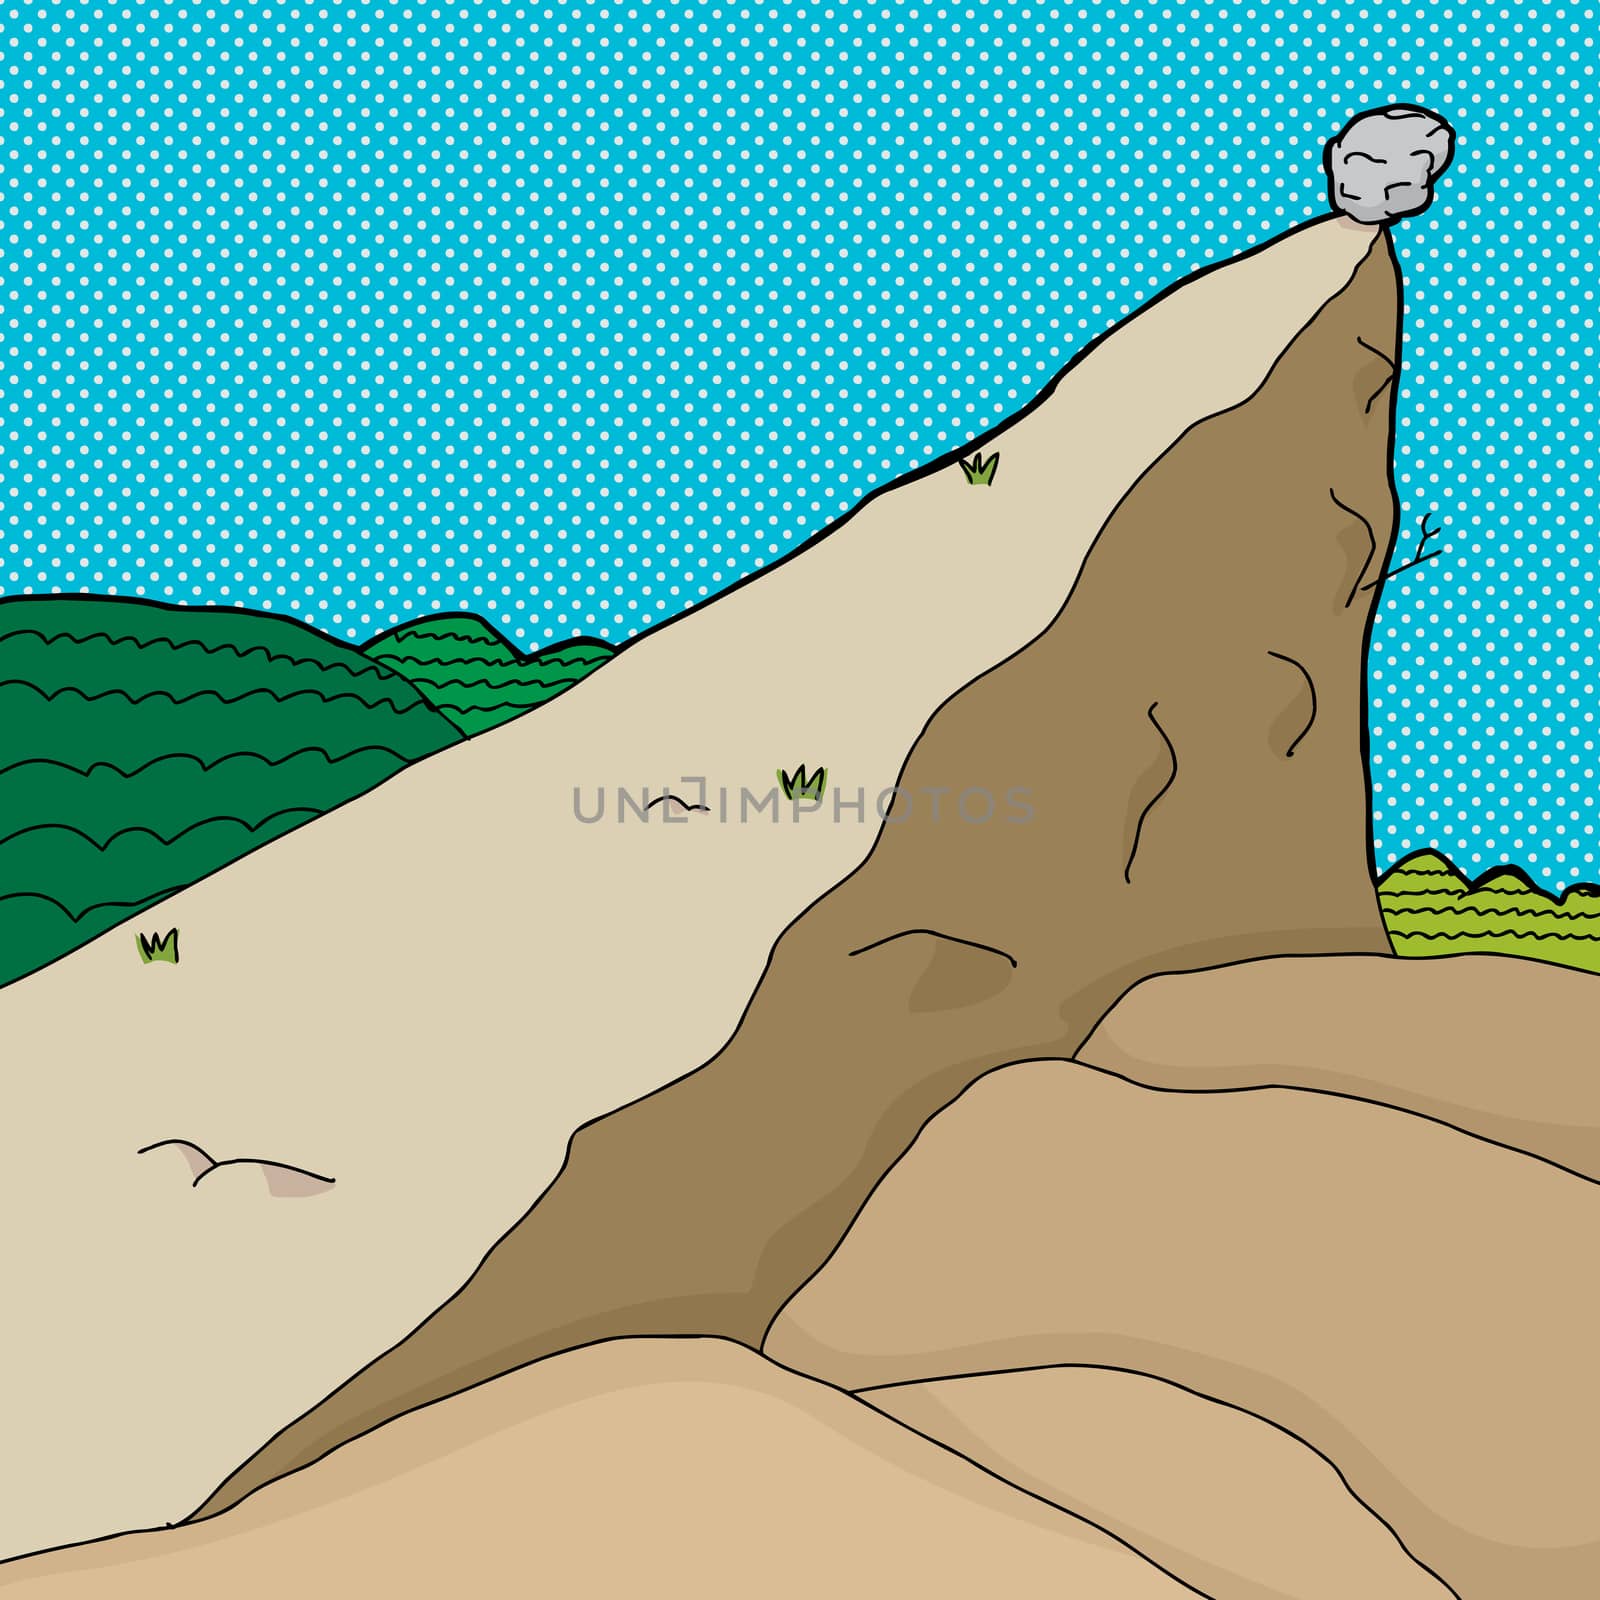 Single Boulder On Cliff by TheBlackRhino